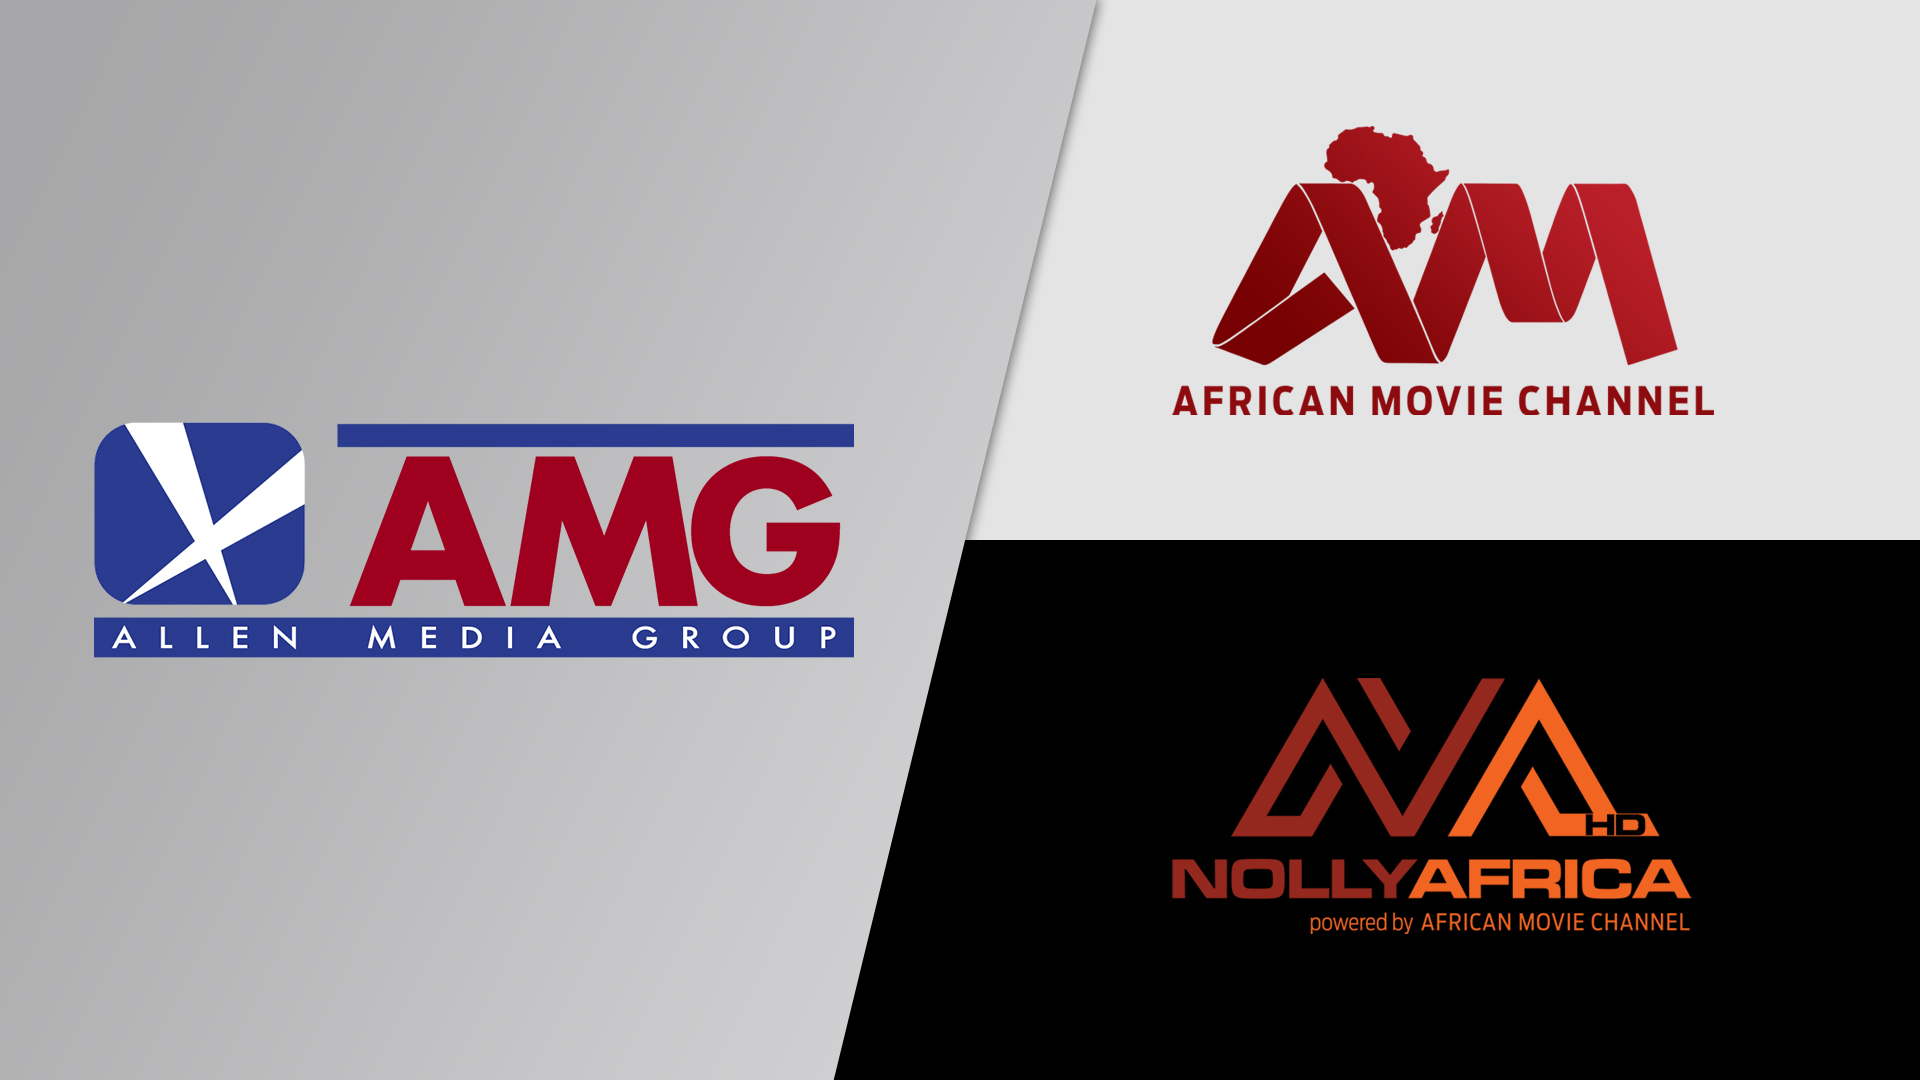 Local Now Adds ‘Nolly Africa HD’ Channel in Partnership With African Movie Channel For Free